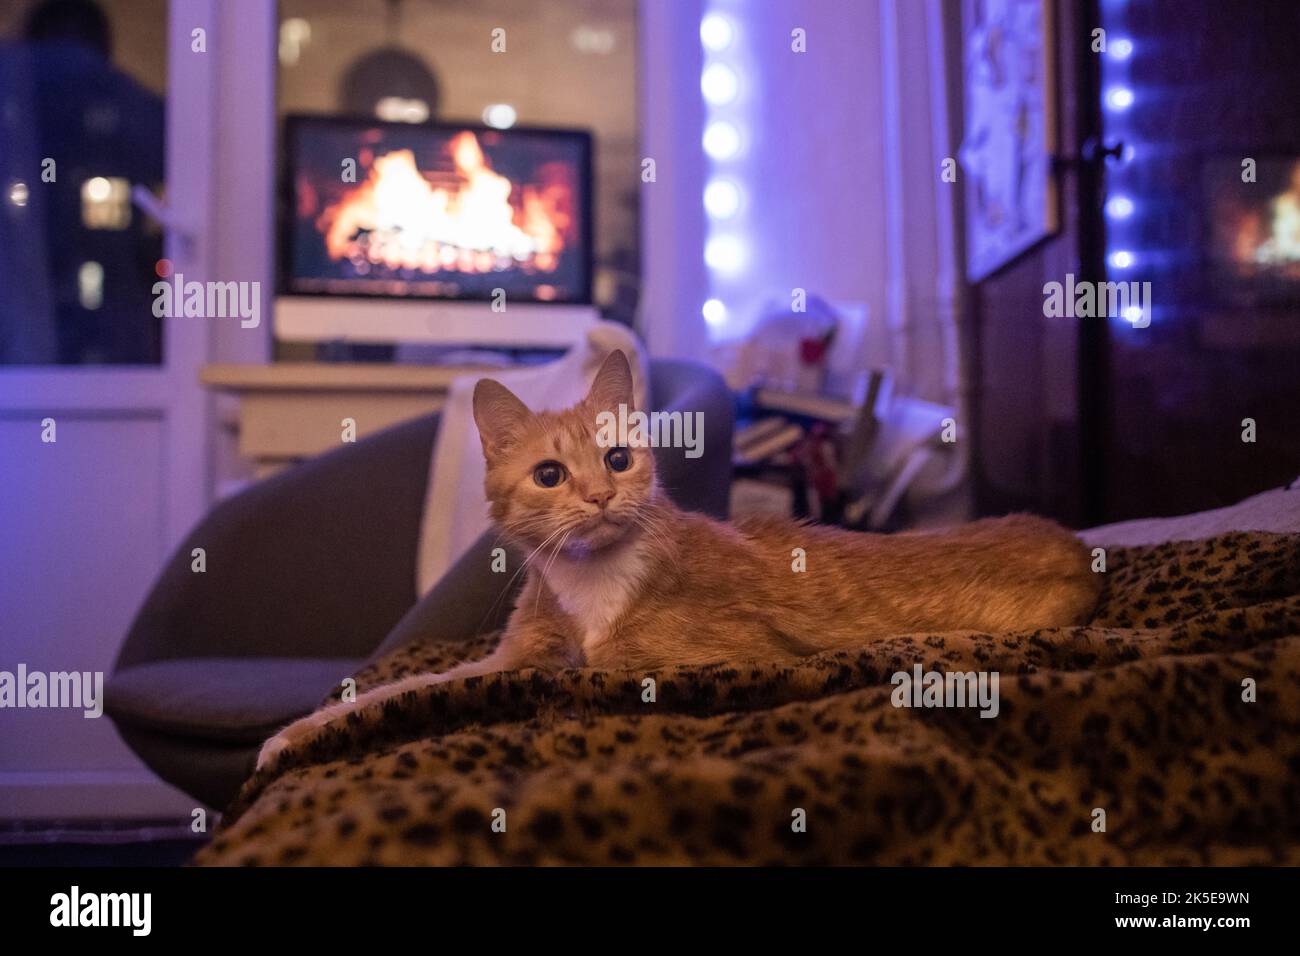 red cat lies on the sofa, against the background of a monitor with a fireplace, in beautiful evening lighting. Stock Photo